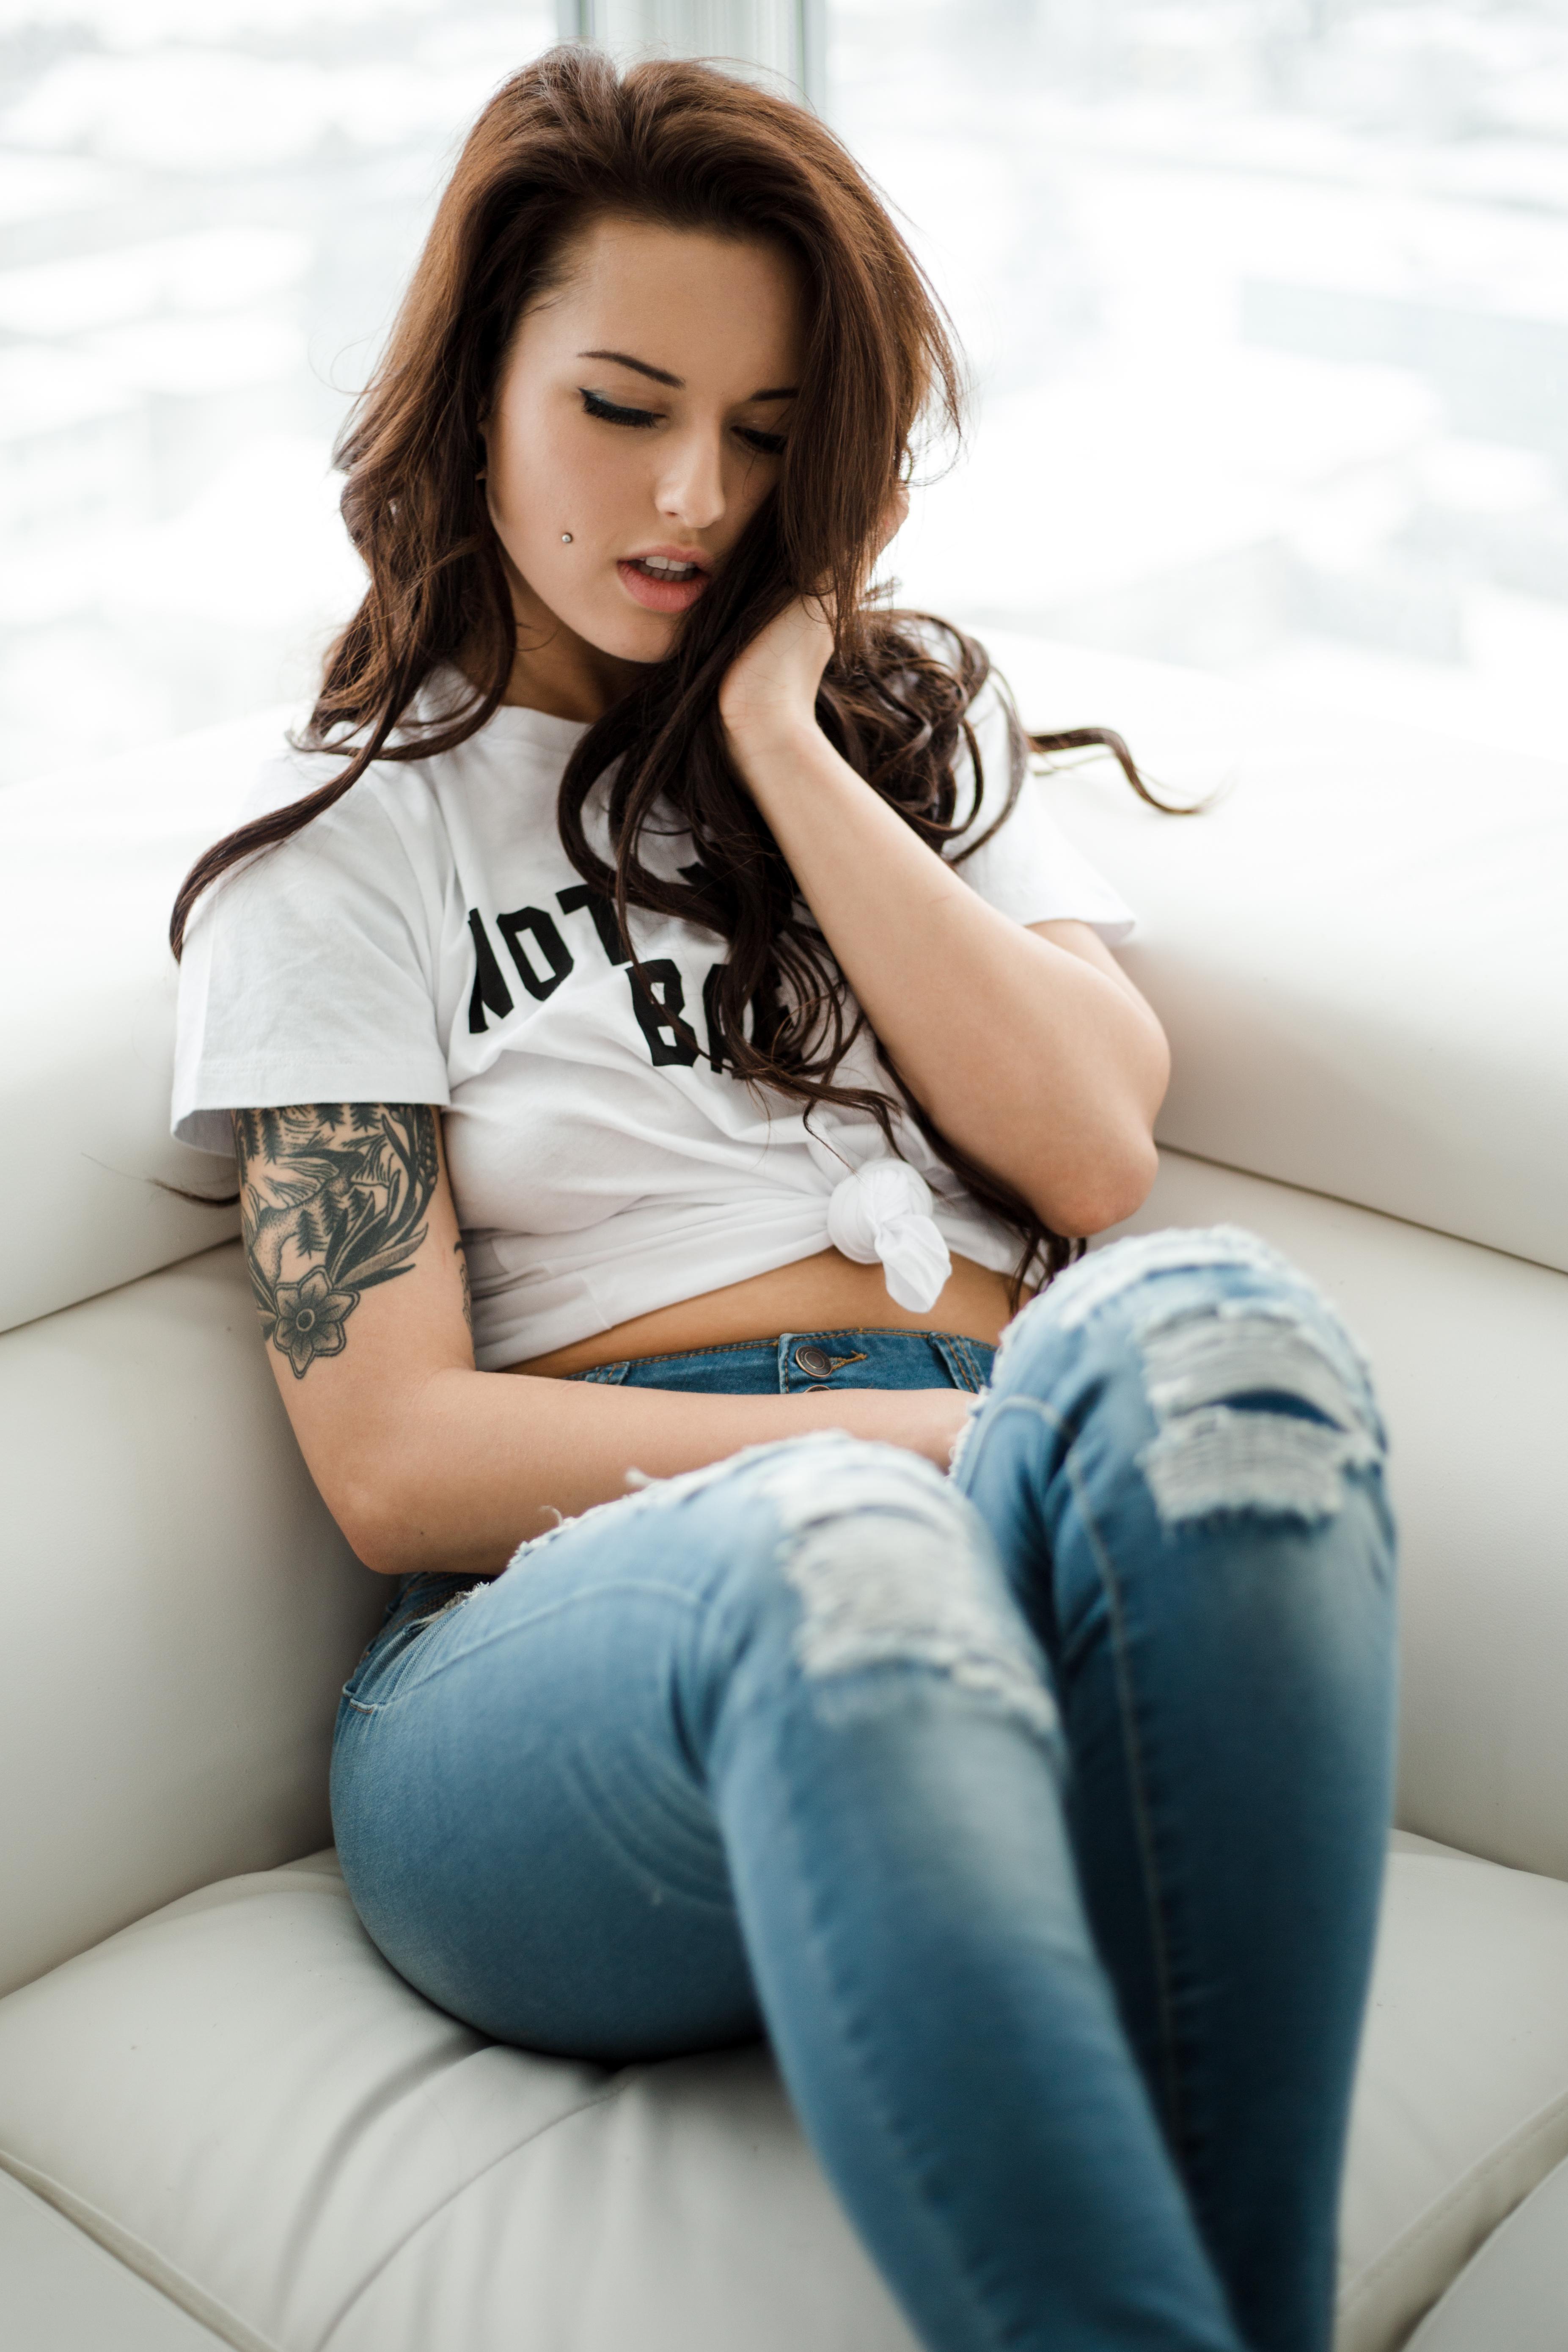 People 3706x5559 Octavia May Suicide Girls model women couch tattoo inked girls torn jeans T-shirt women indoors sitting brunette pierced cheeks portrait display